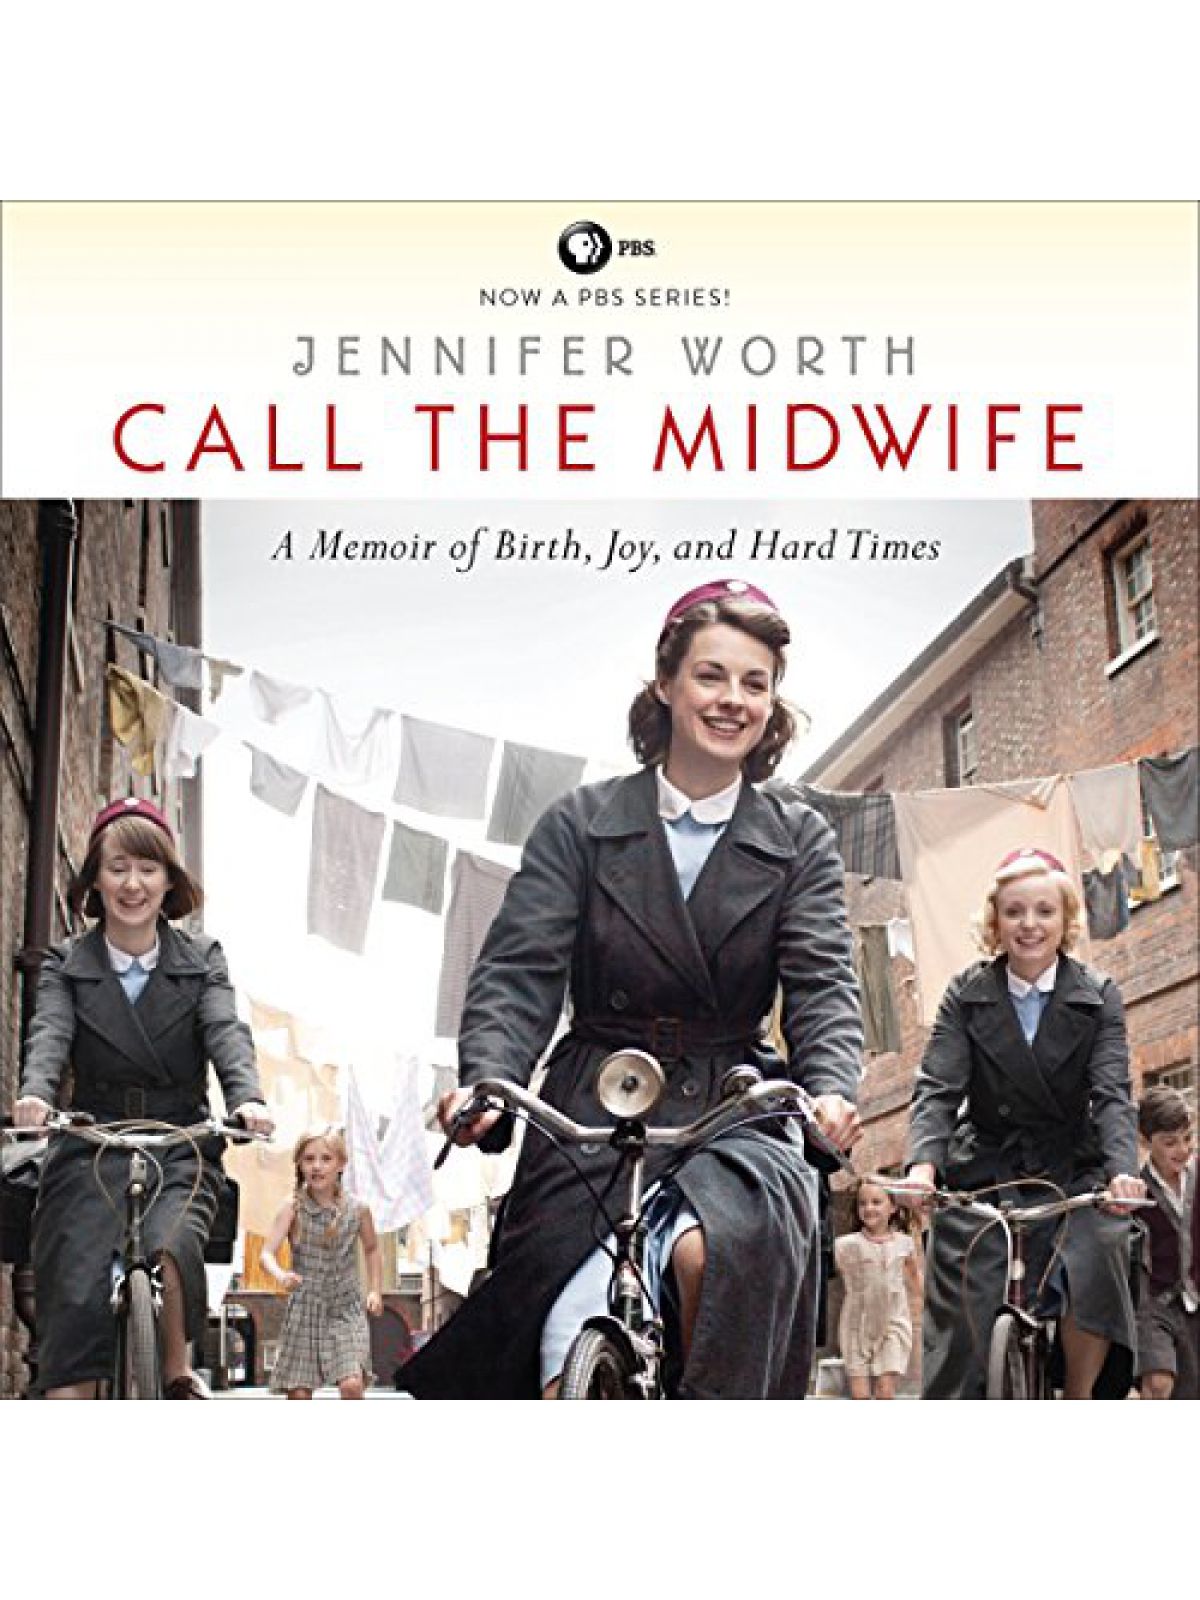 CALL THE MIDWIFE- TRUE STORY OF THE EAST END IN THE 1950S  Купить Книгу на Английском